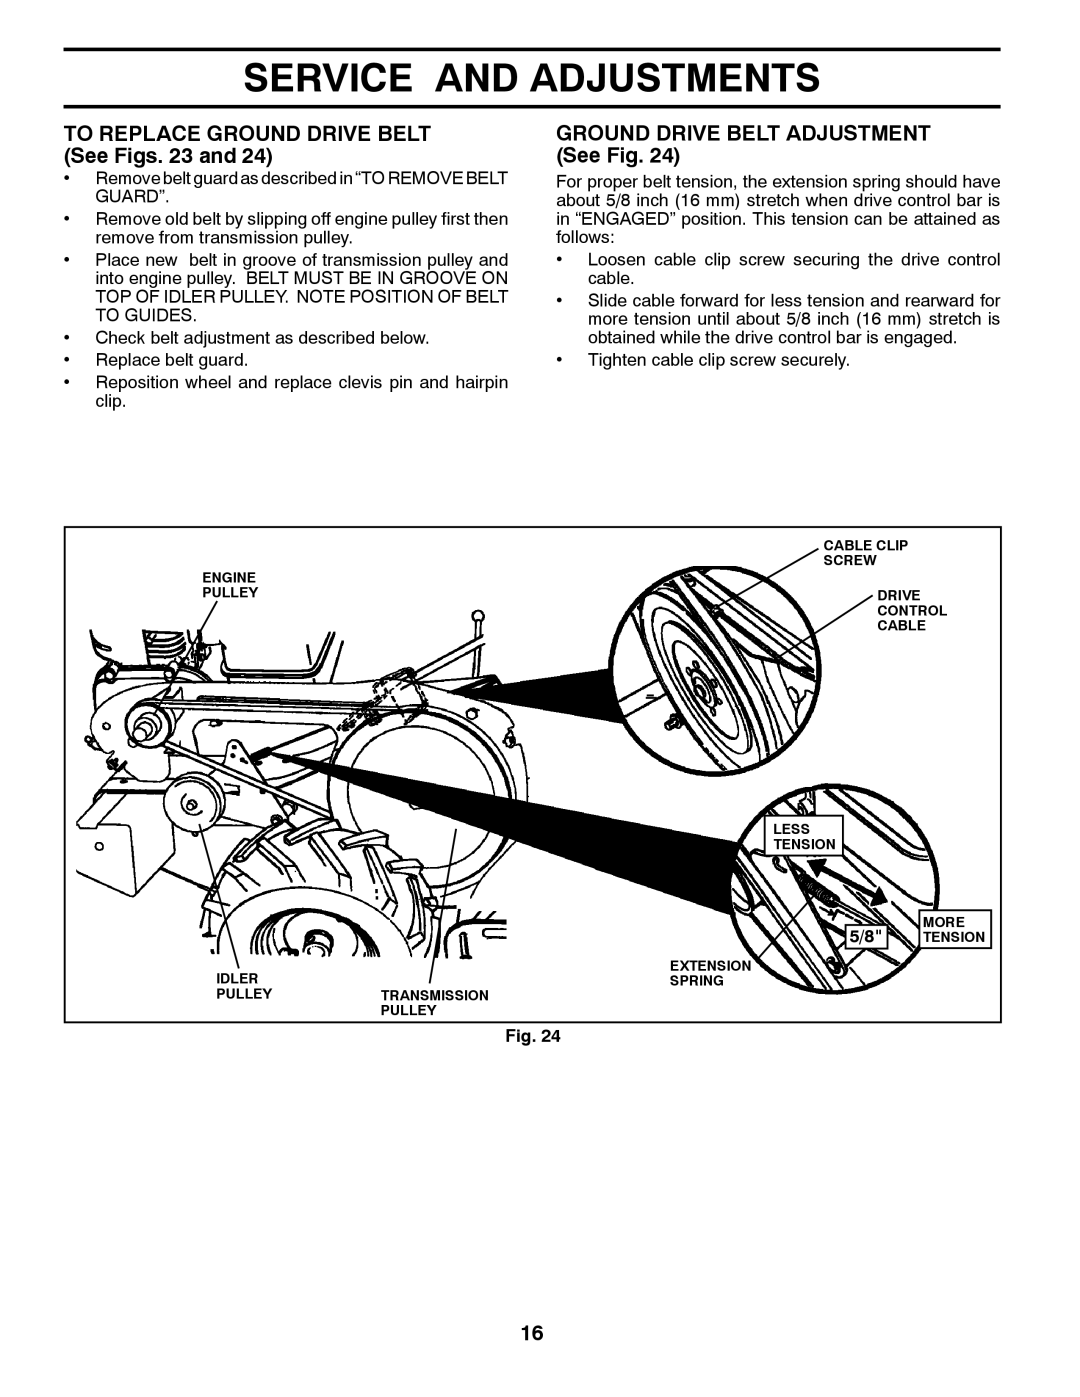 Husqvarna DRT 900 owner manual TO REPLACE GROUND DRIVE BELT See Figs. 23 and, GROUND DRIVE BELT ADJUSTMENT See Fig 